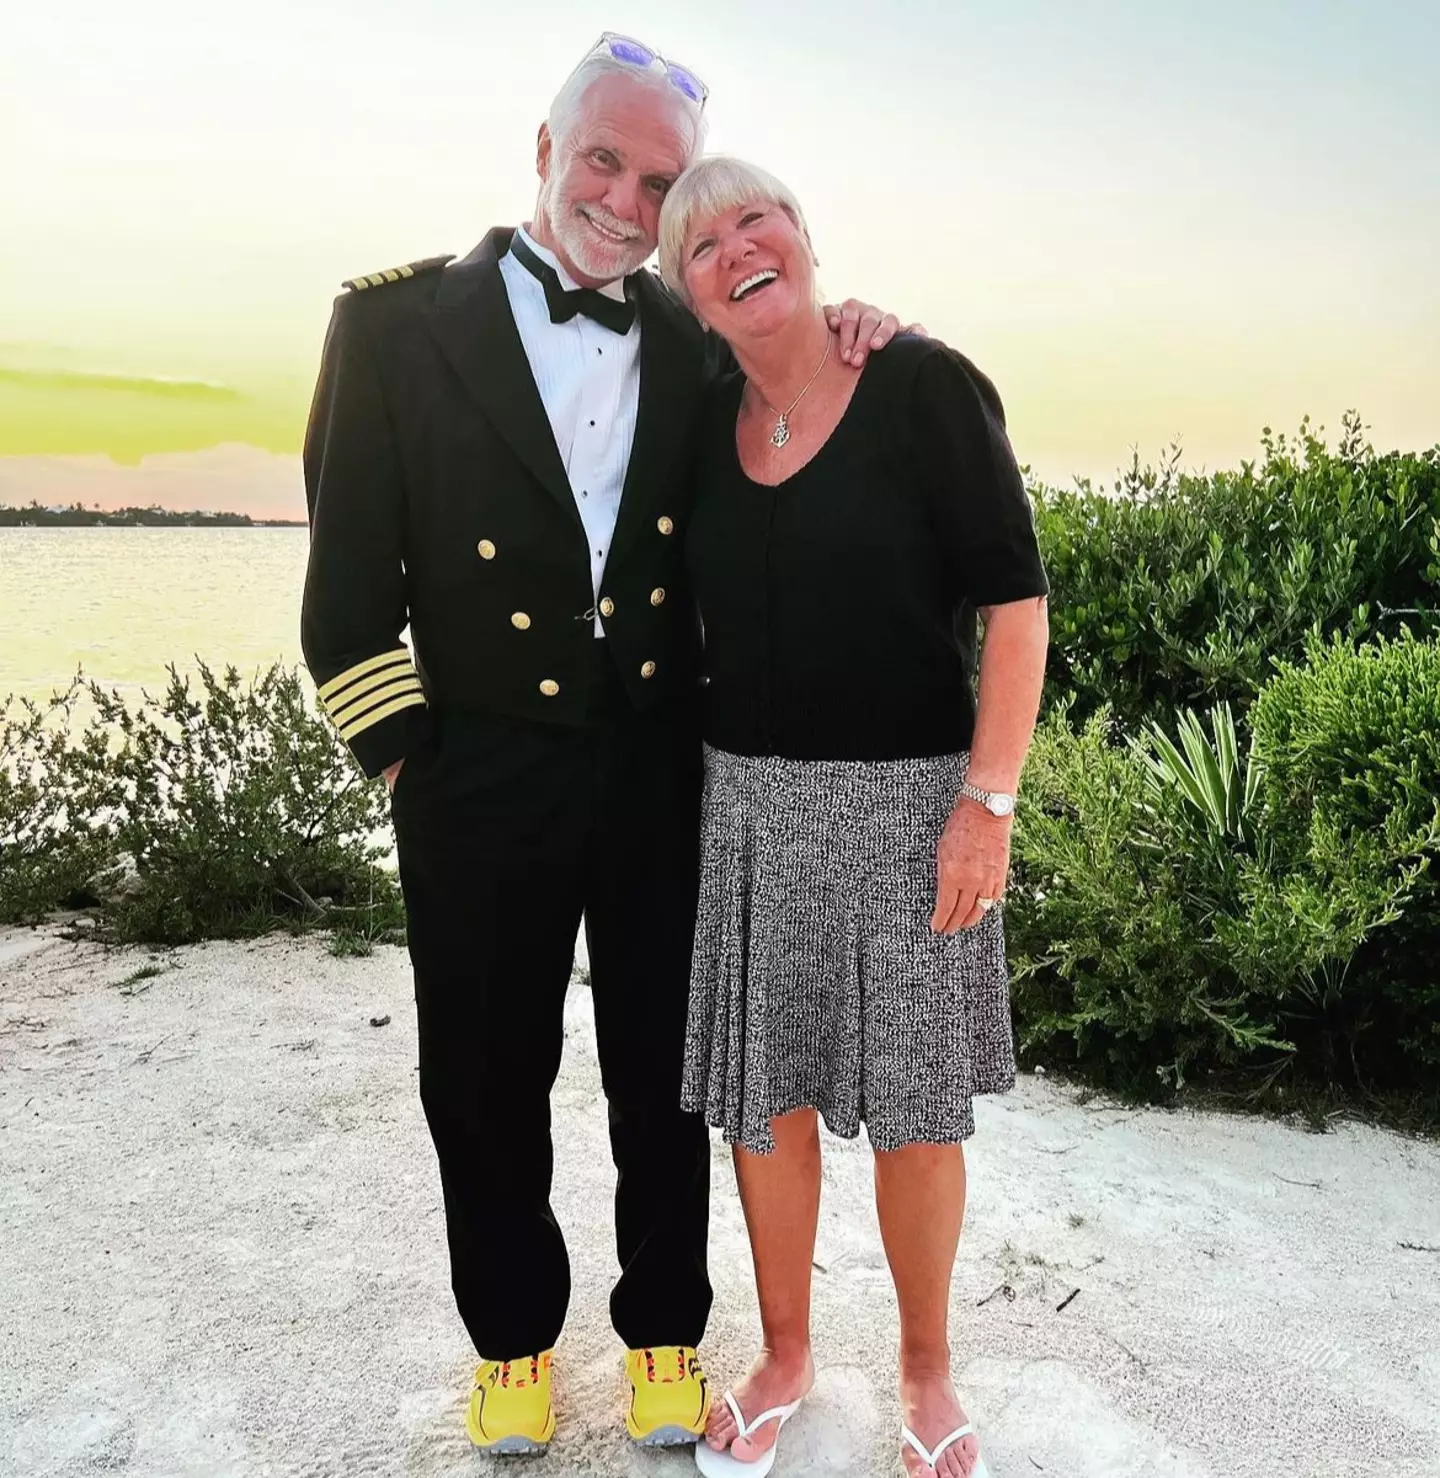 Captain Lee and his wife, Mary Anne.